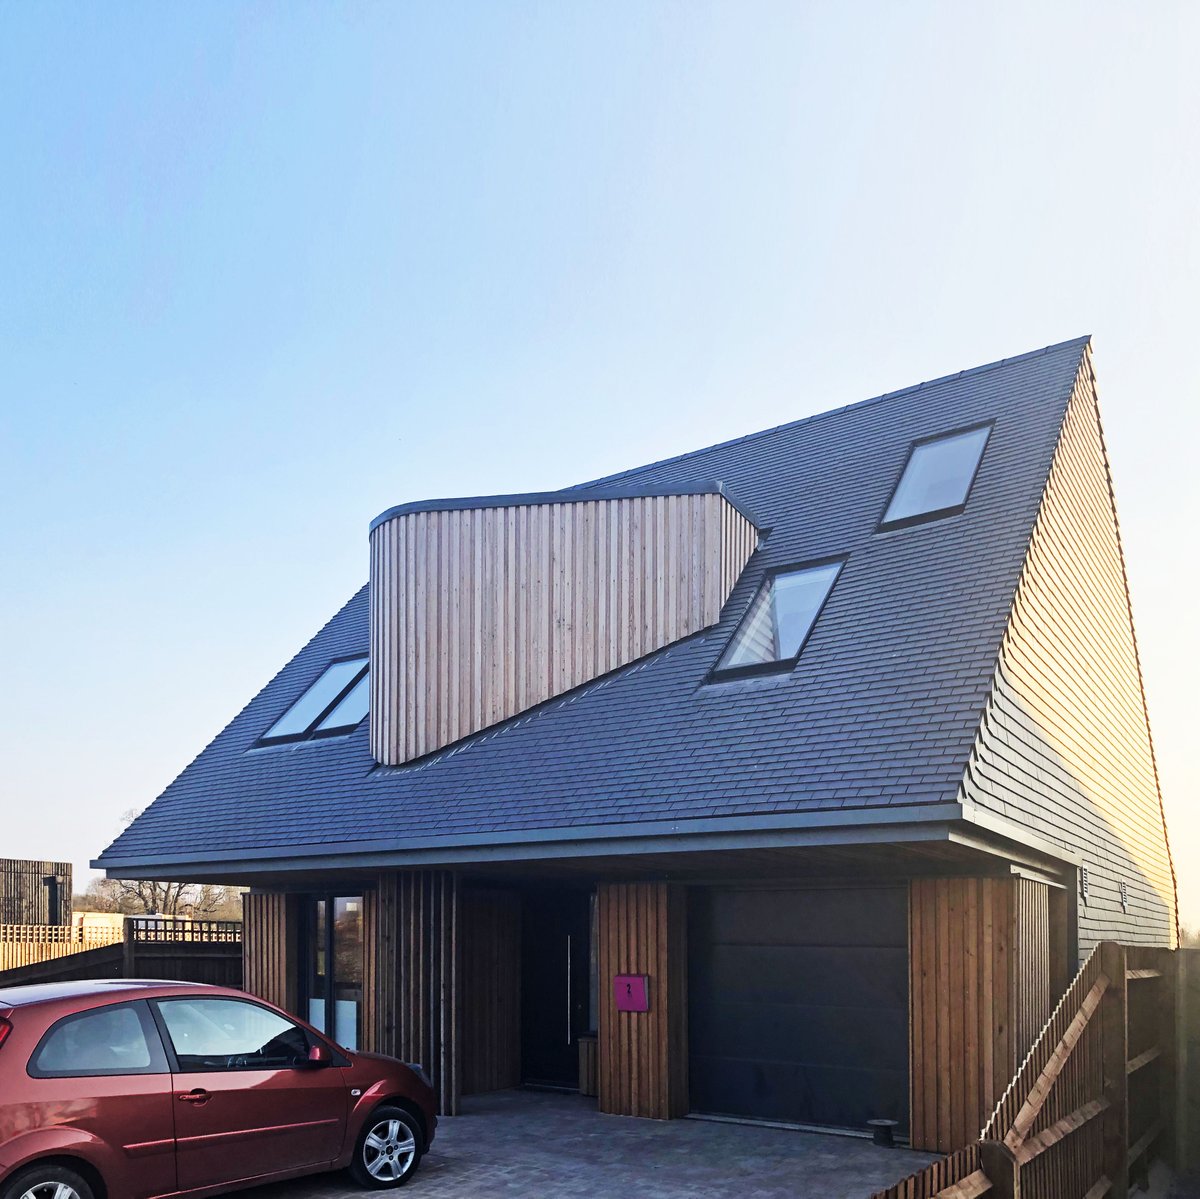 Adrian James Architects On Twitter Kevin Mccloud S Favourite House Is A Finalist In The Uk 2020 Roofing Awards Aja S Pangolin Kevin S First Choice On Grand Designs The Street Has Been Shortlisted See Here